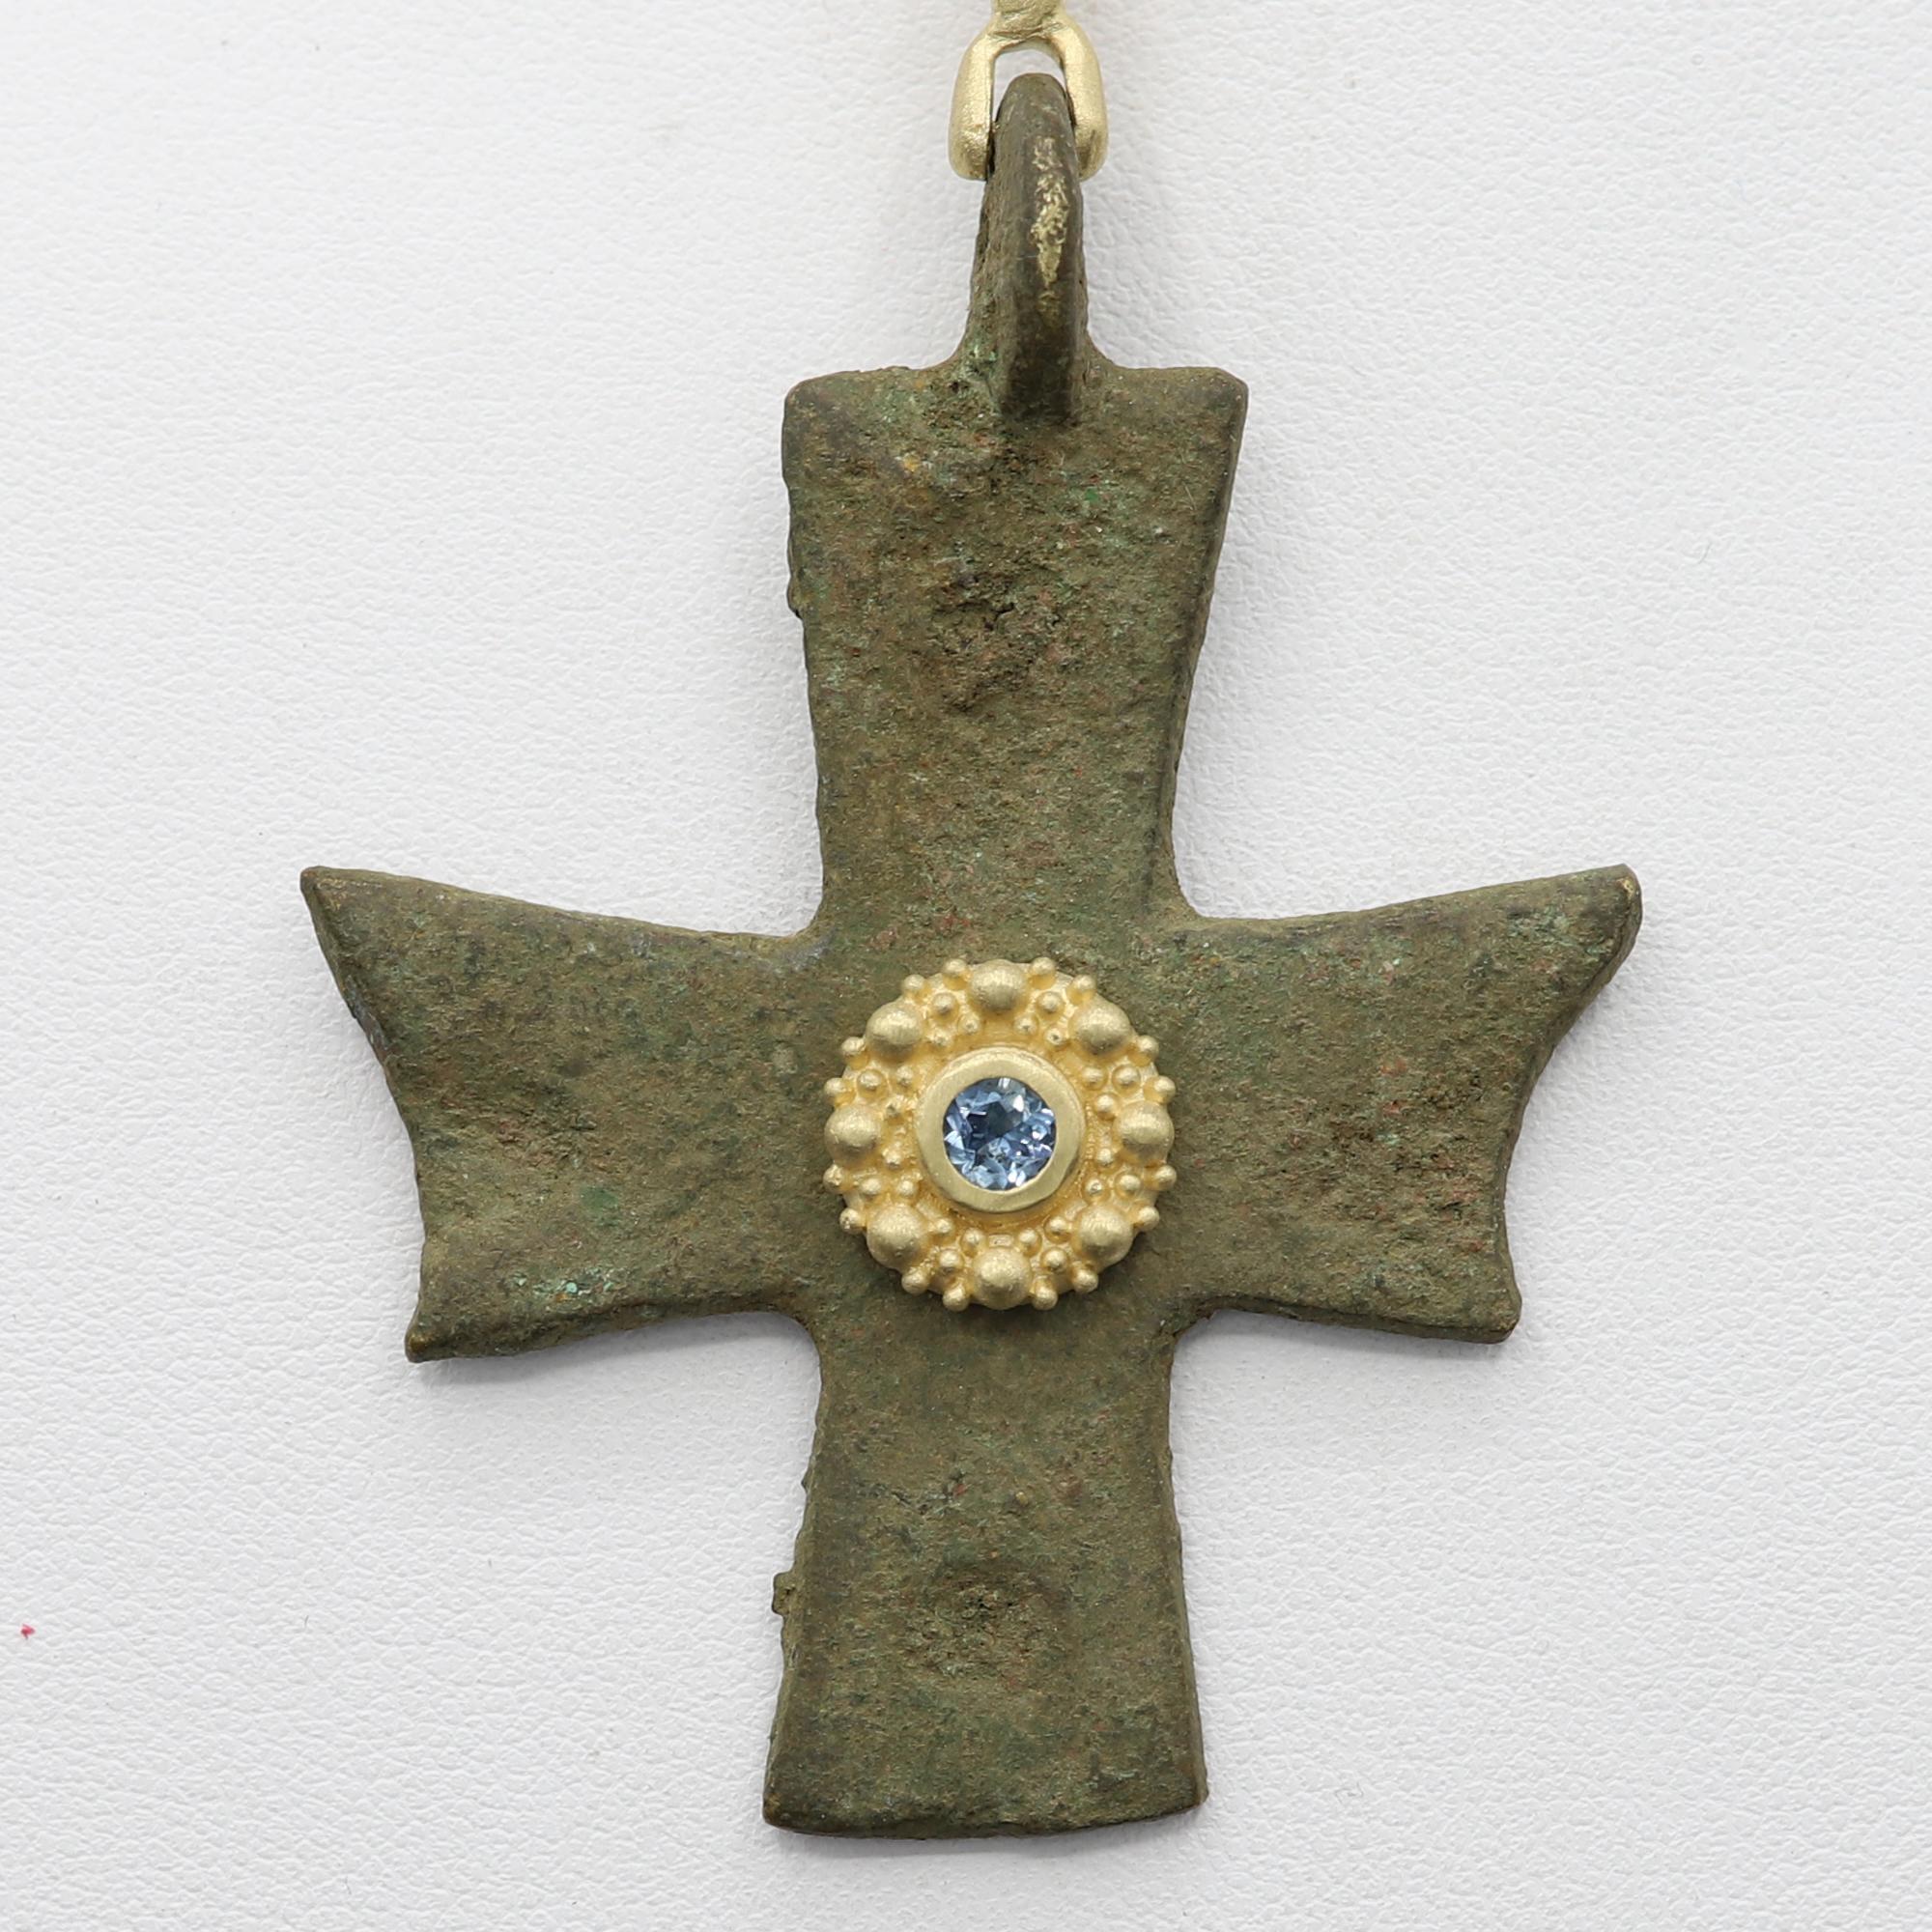 Magnificent piece of History - can be yours today !
Ancient Byzantine Period cross.
Hand set in Italy with 18k Yellow Gold & Blue Aquamarine.
Approx size 2' inch / 50 mm.
This Antique Bronze Cross is estimated from 600-900 AD 
Included 16' - 18'